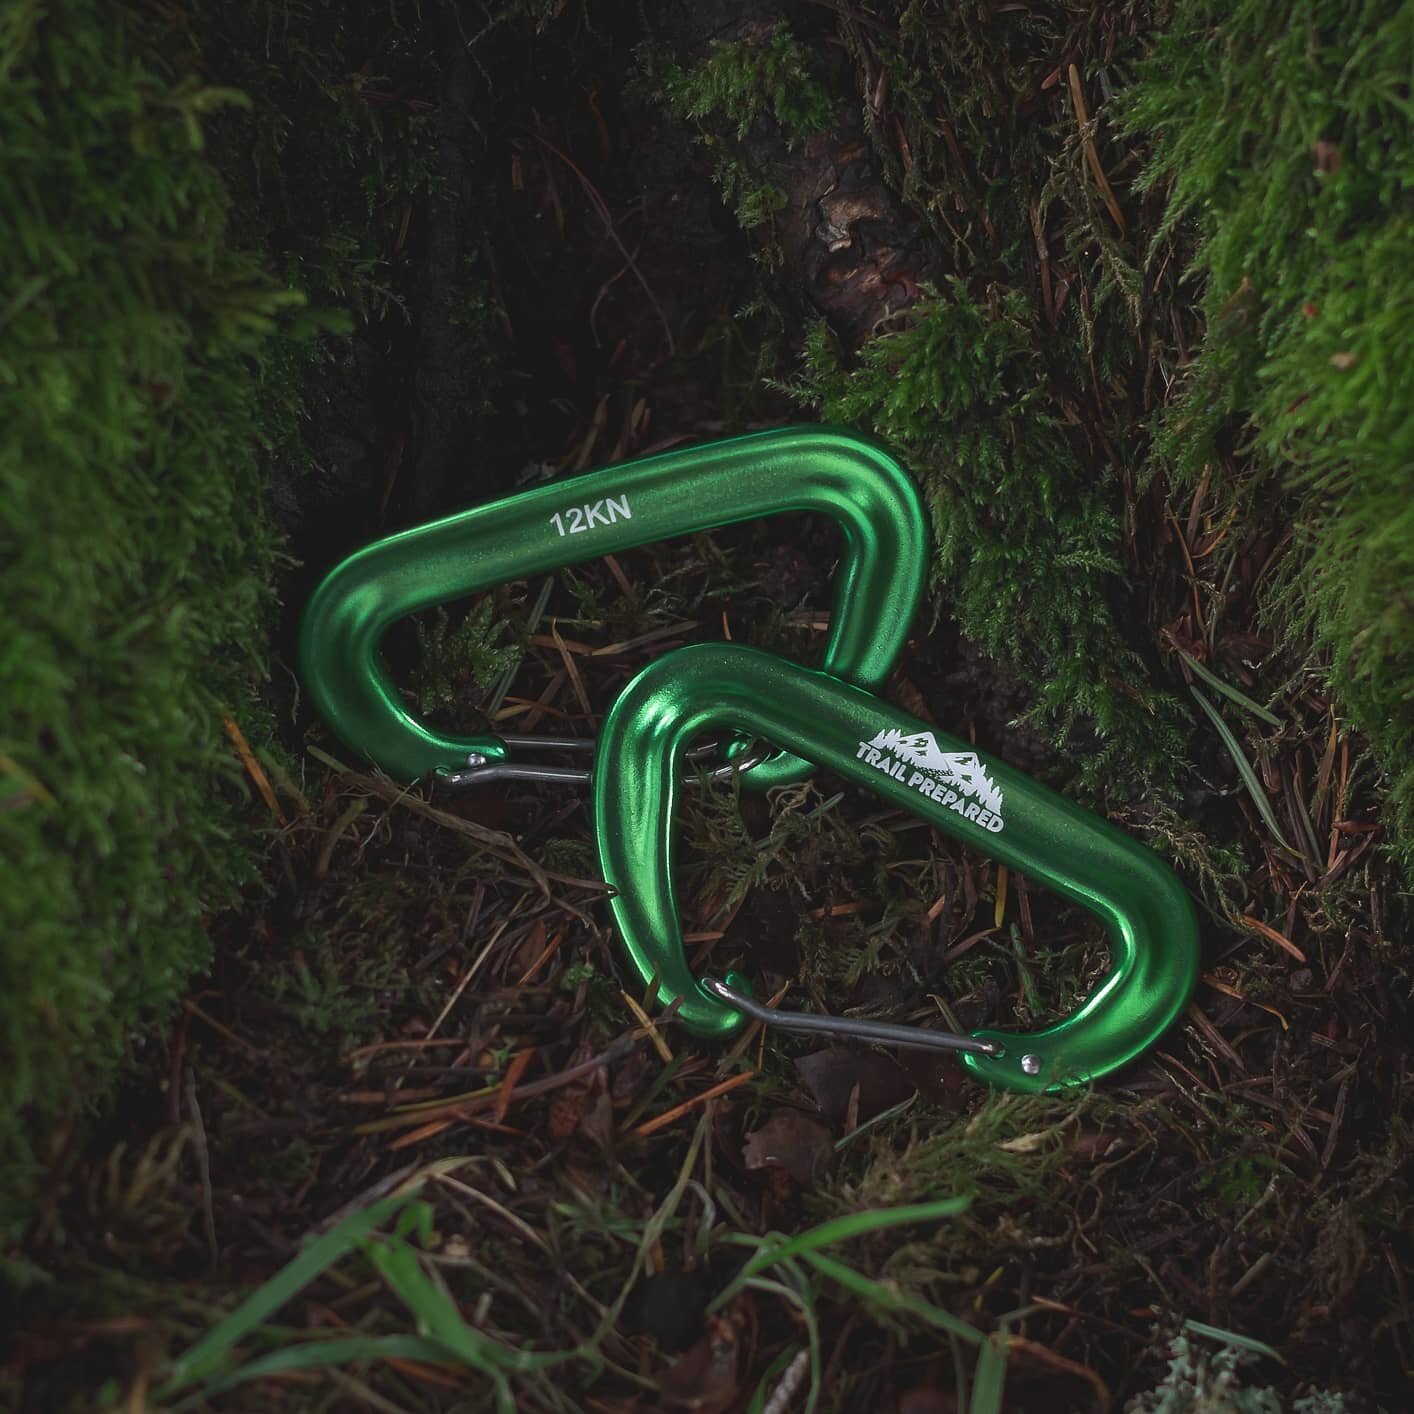 Are you feeling lucky?🍀

Try one of our Camp Hammocks, and a set of matching Wiregate Carabiners. They're both green, and might bring you some luck!😘💚
-
-
-
-
-
#TrailPrepared #YouBelongOutdoors #StPatricksDay #HappyStPatricksDay #Lucky #LuckOfThe